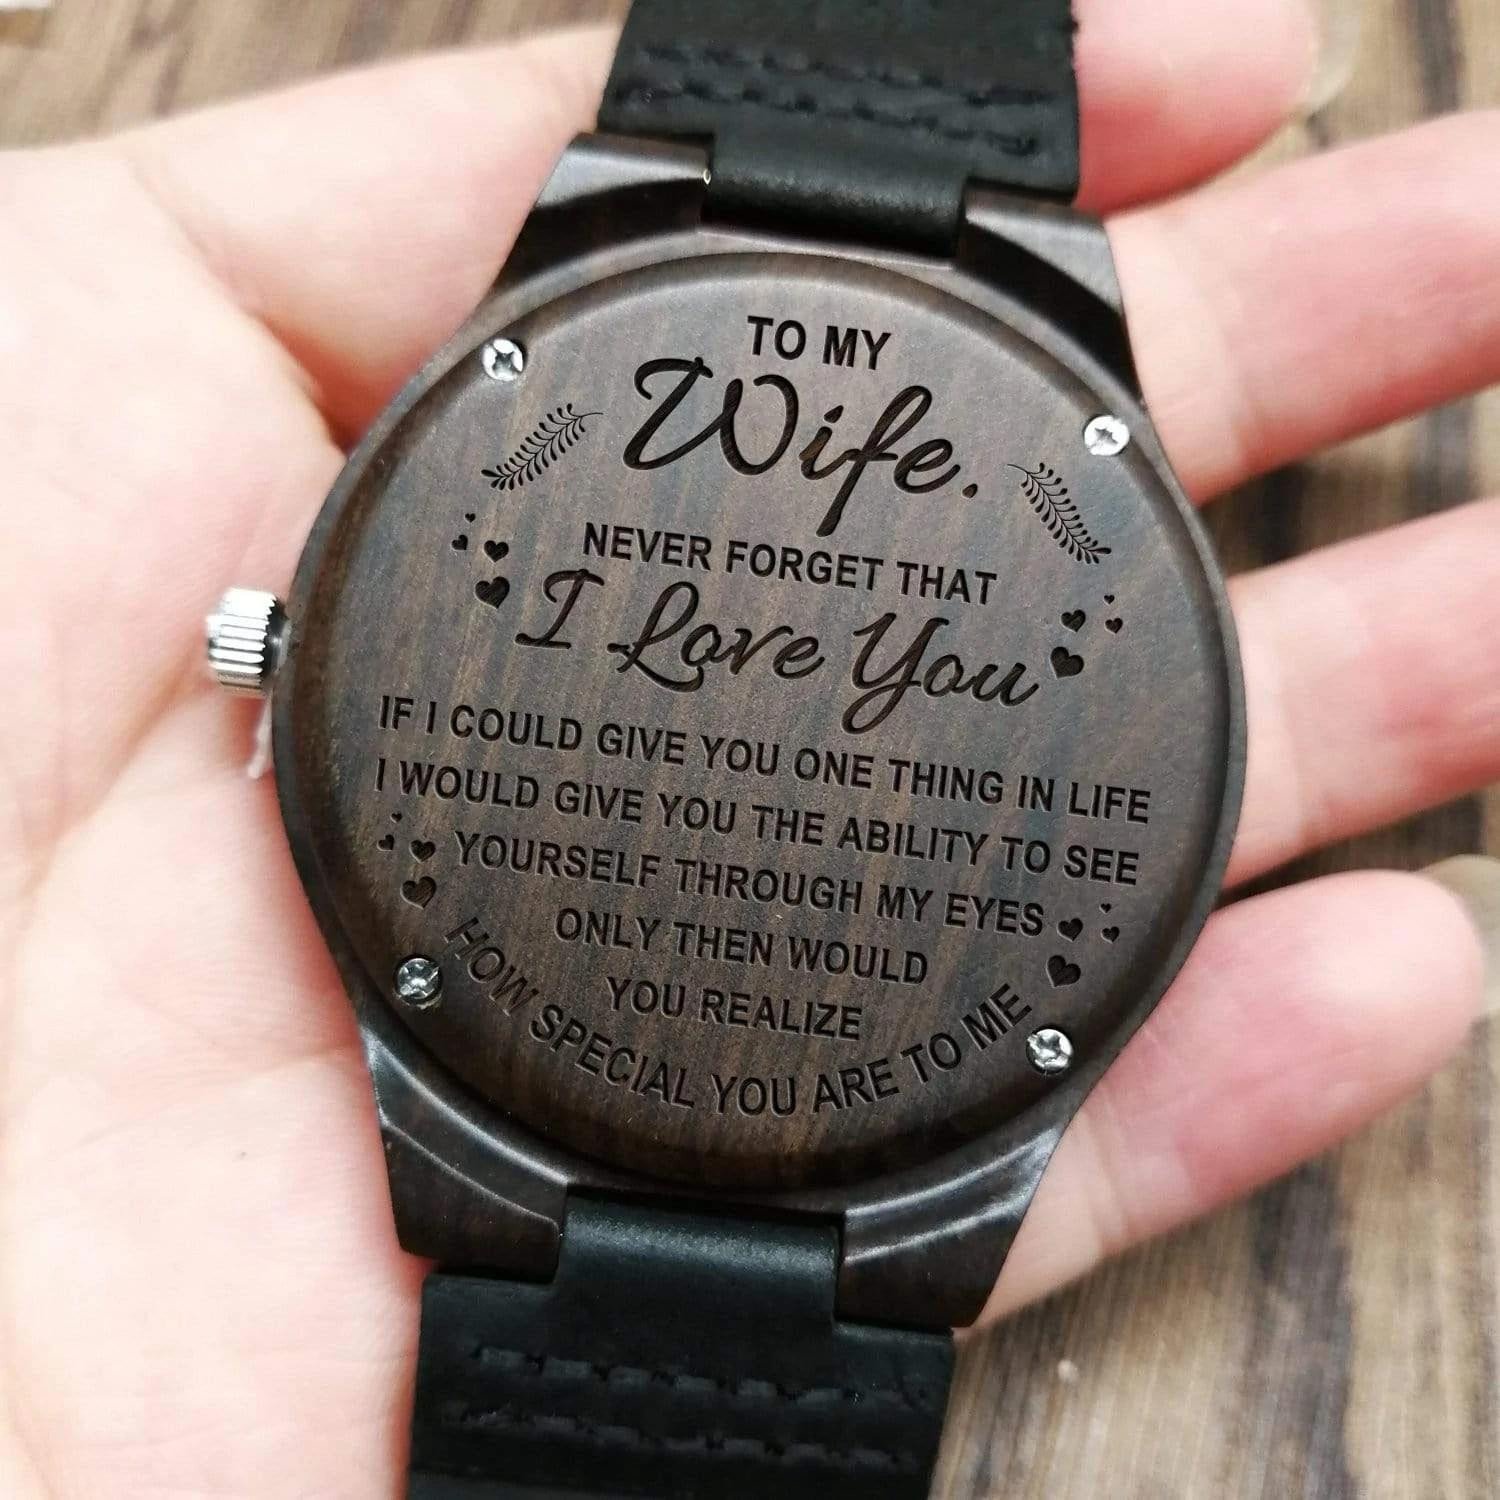 How Special You Are To Me Wonderful Engraved Wooden Watch Gift For Wife